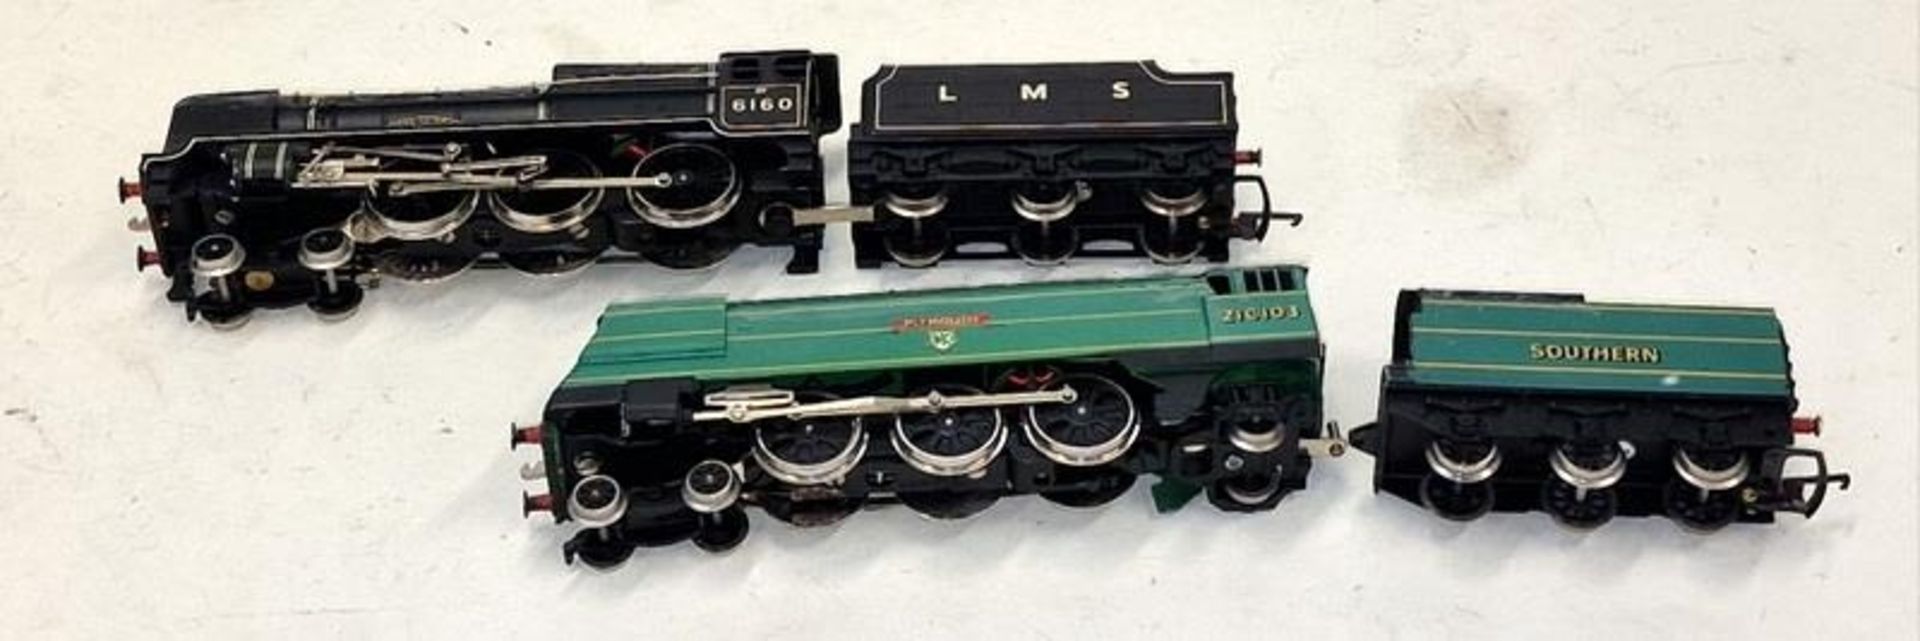 Two OO Gauge Locomotives to include Plymouth 21C103 and LMS Queen Victorias rifle men 6160 - - Image 4 of 4